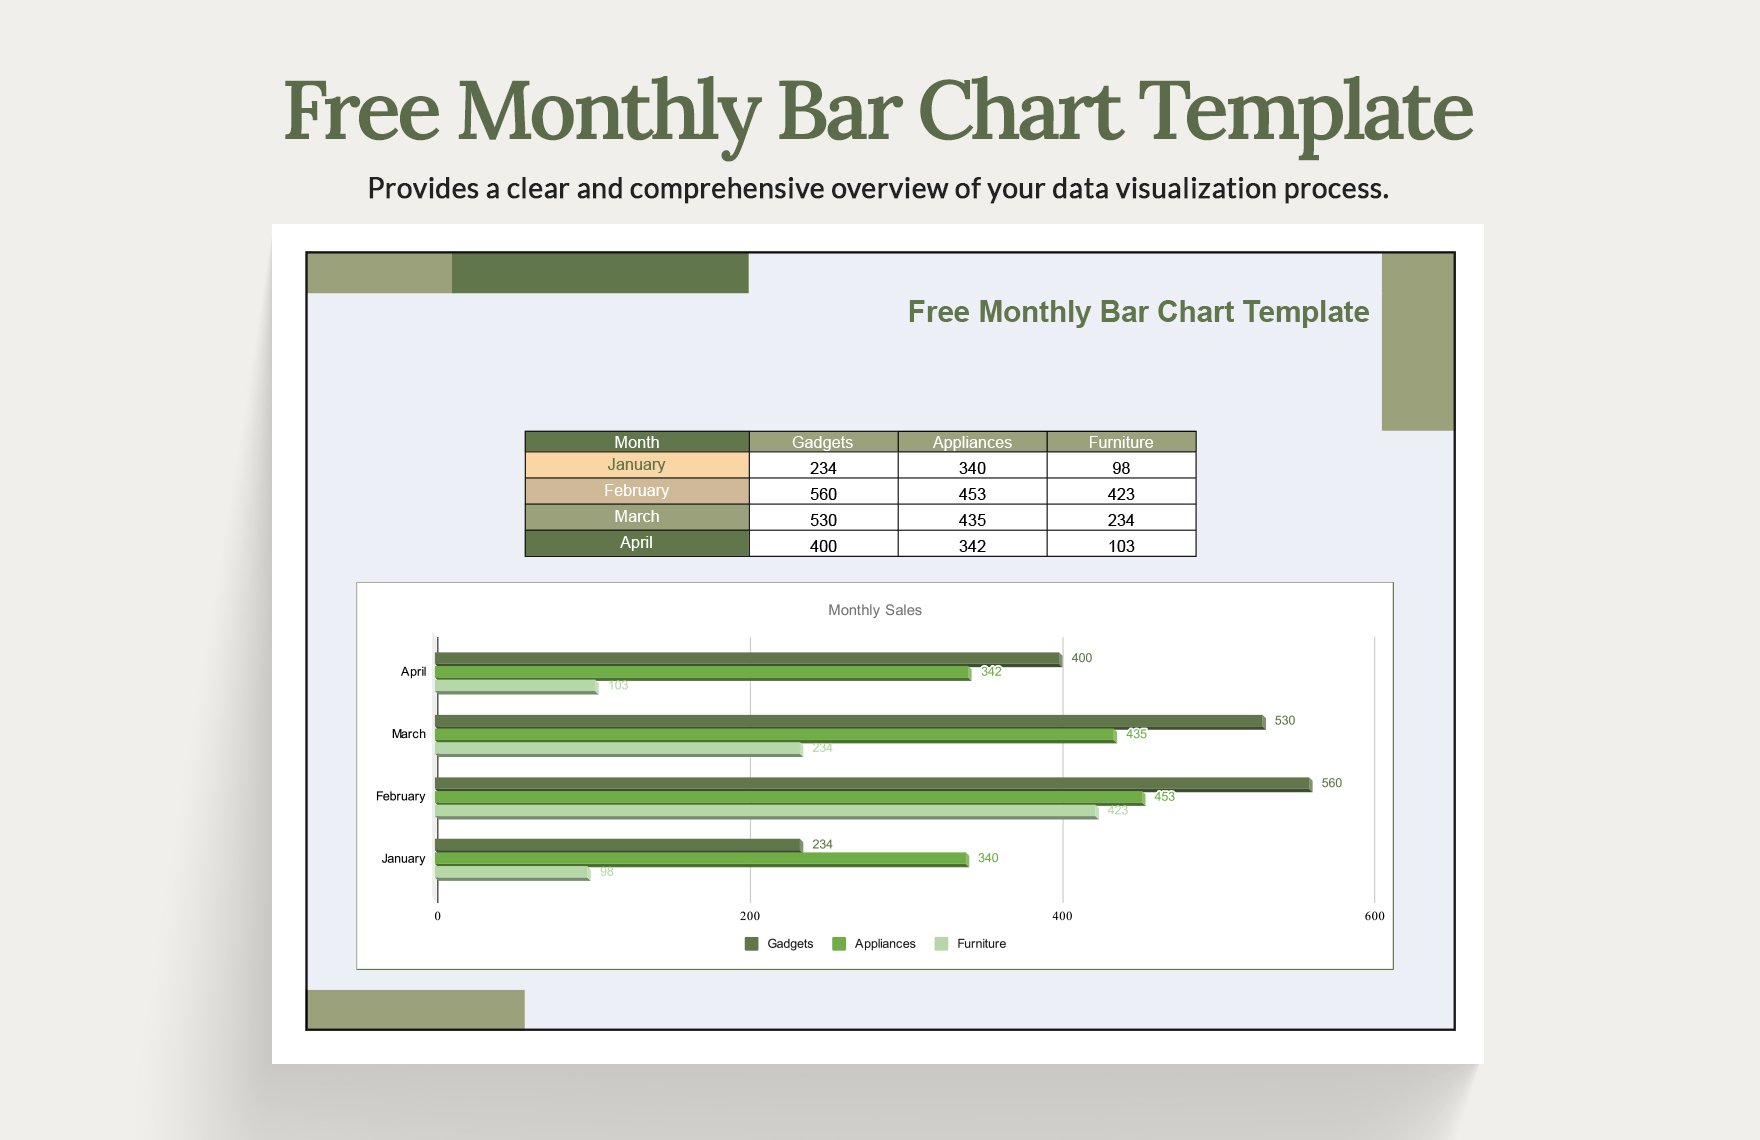 Free Monthly Bar Chart Template